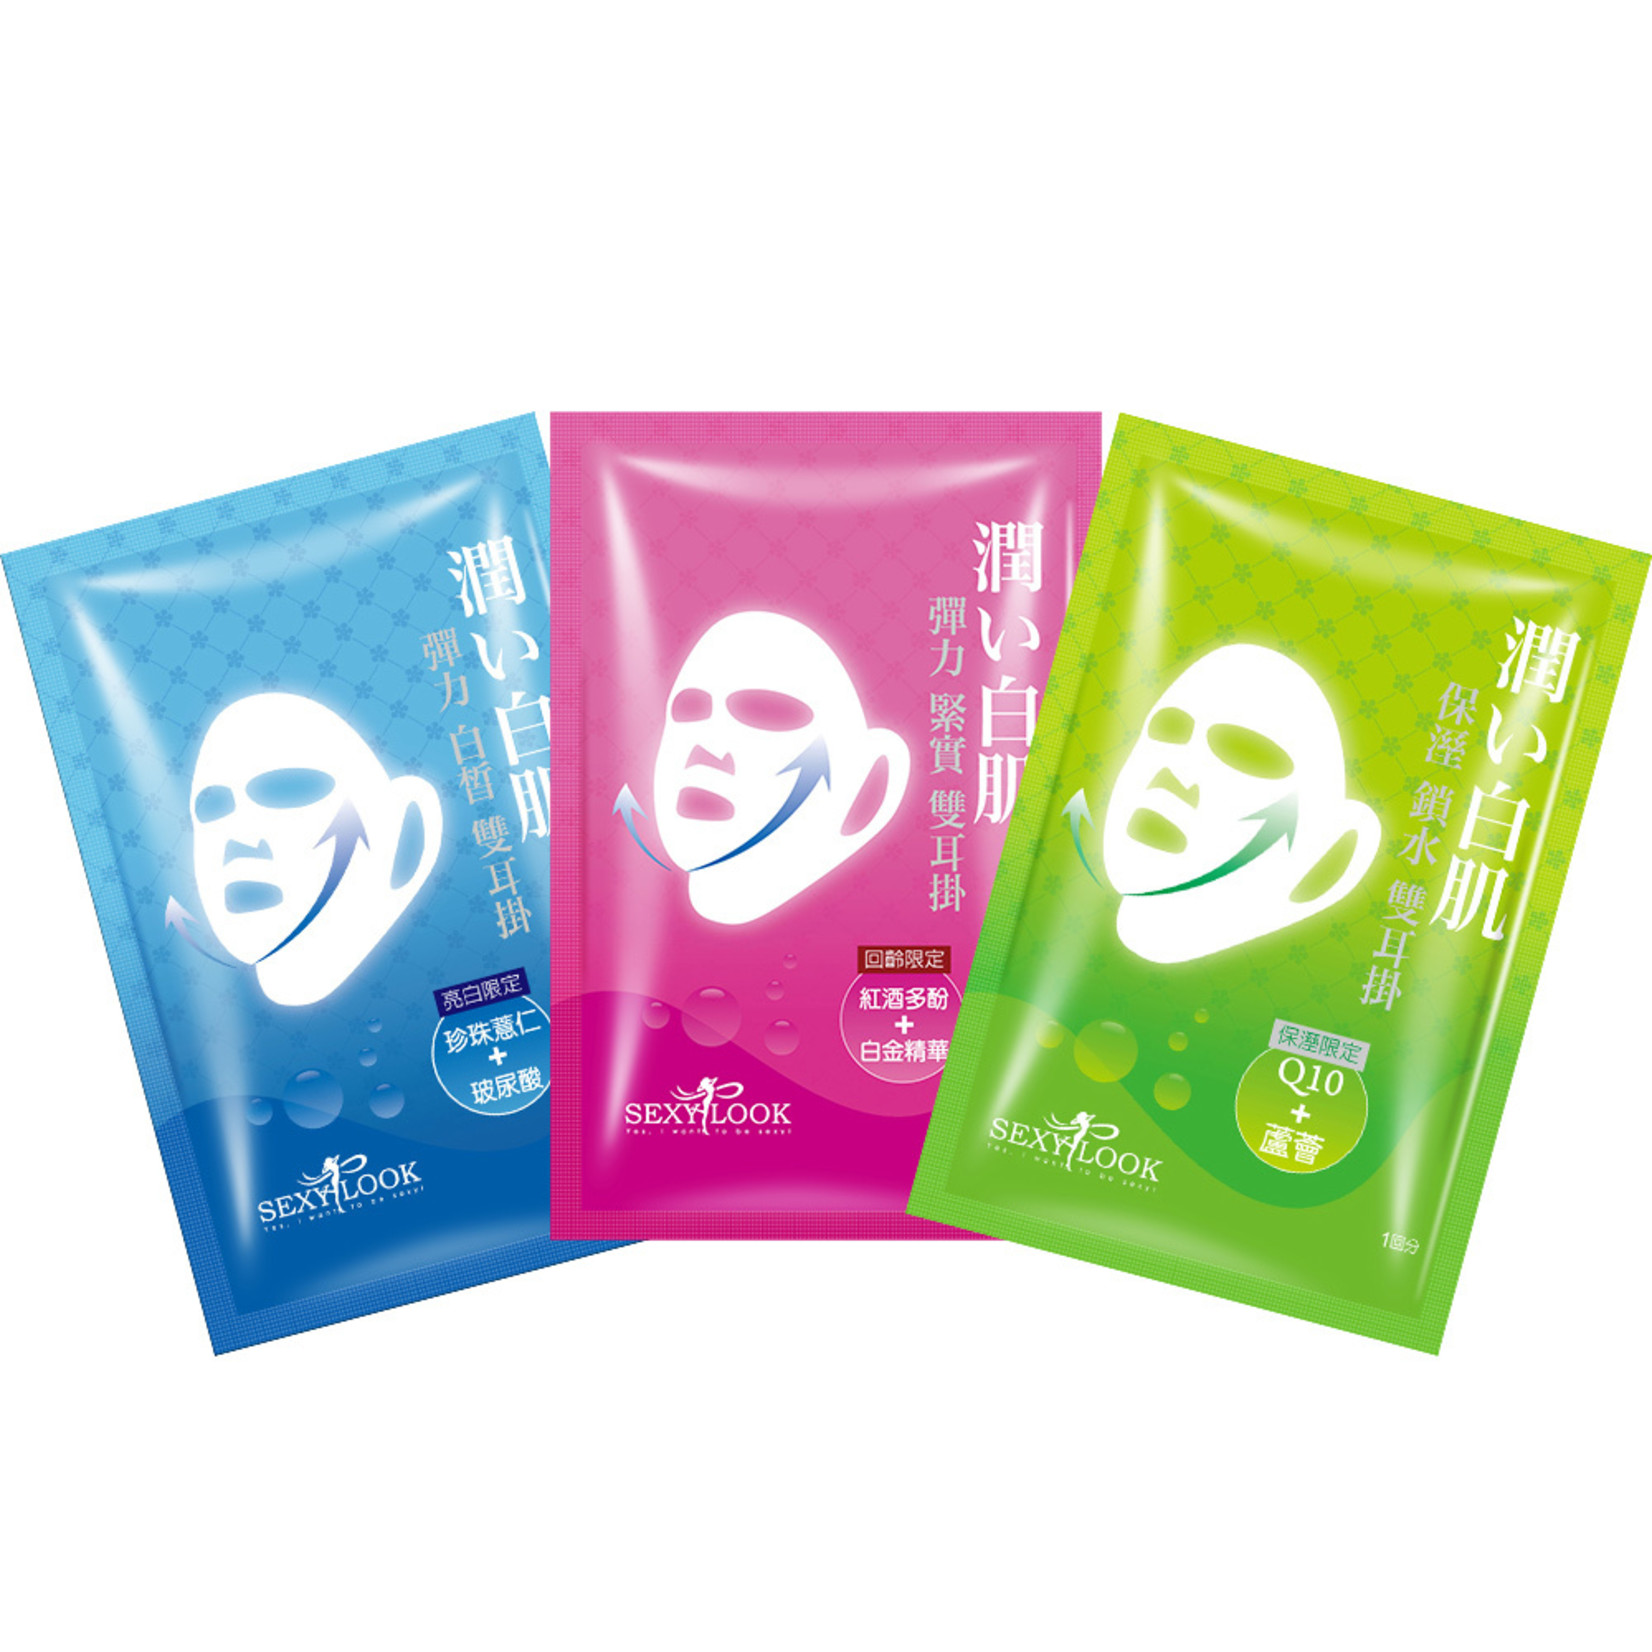 SEXYLOOK Double Lifting Mask Trial Mix (3 pcs)